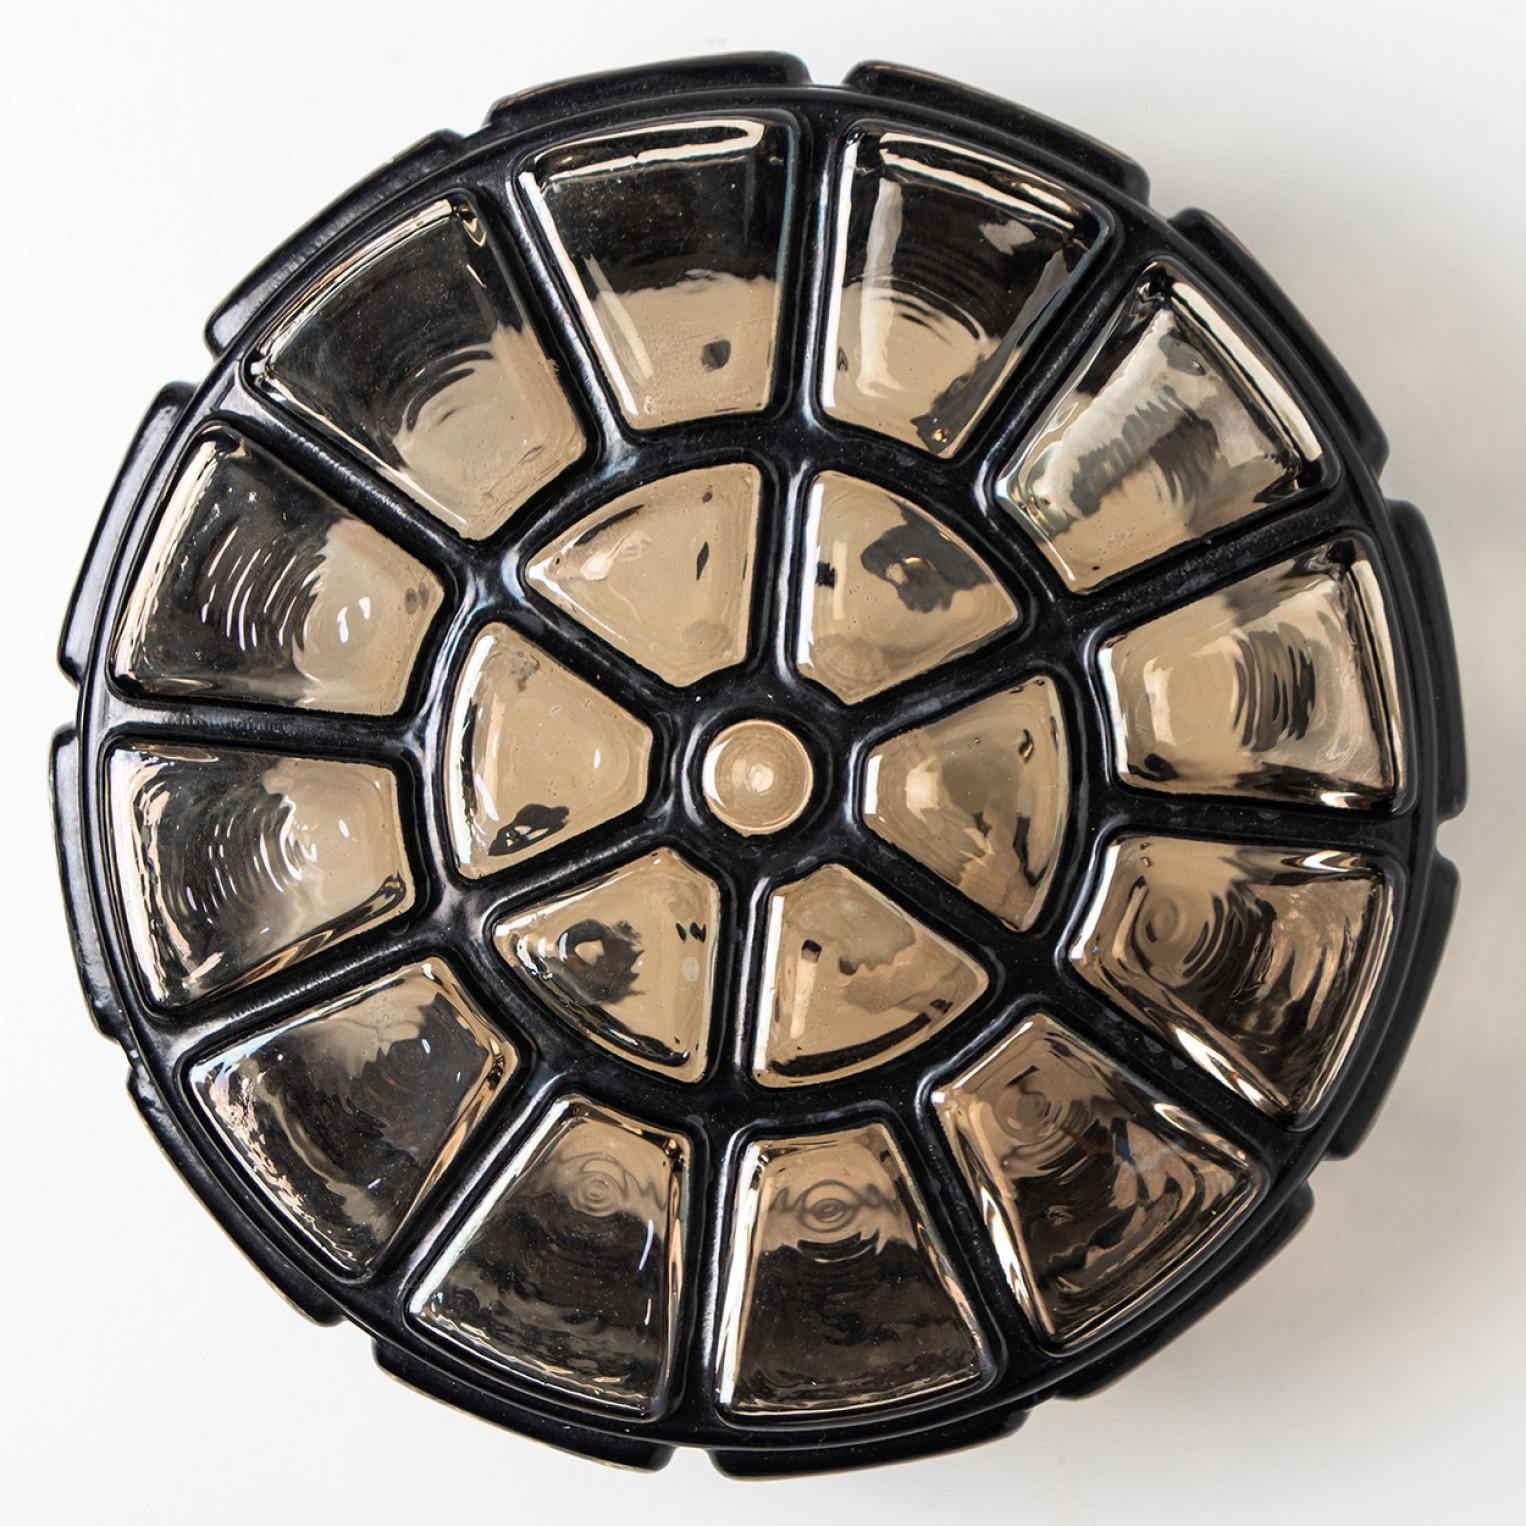 A wonderful round iron flush mount, circa 1970, made by Glashütte Limburg, Germany.
With hand blown smoked glass on brass base and a cage-like structure in iron. Illuminates beautifully.
Can either be mounted on the ceiling or on a wall.

Please